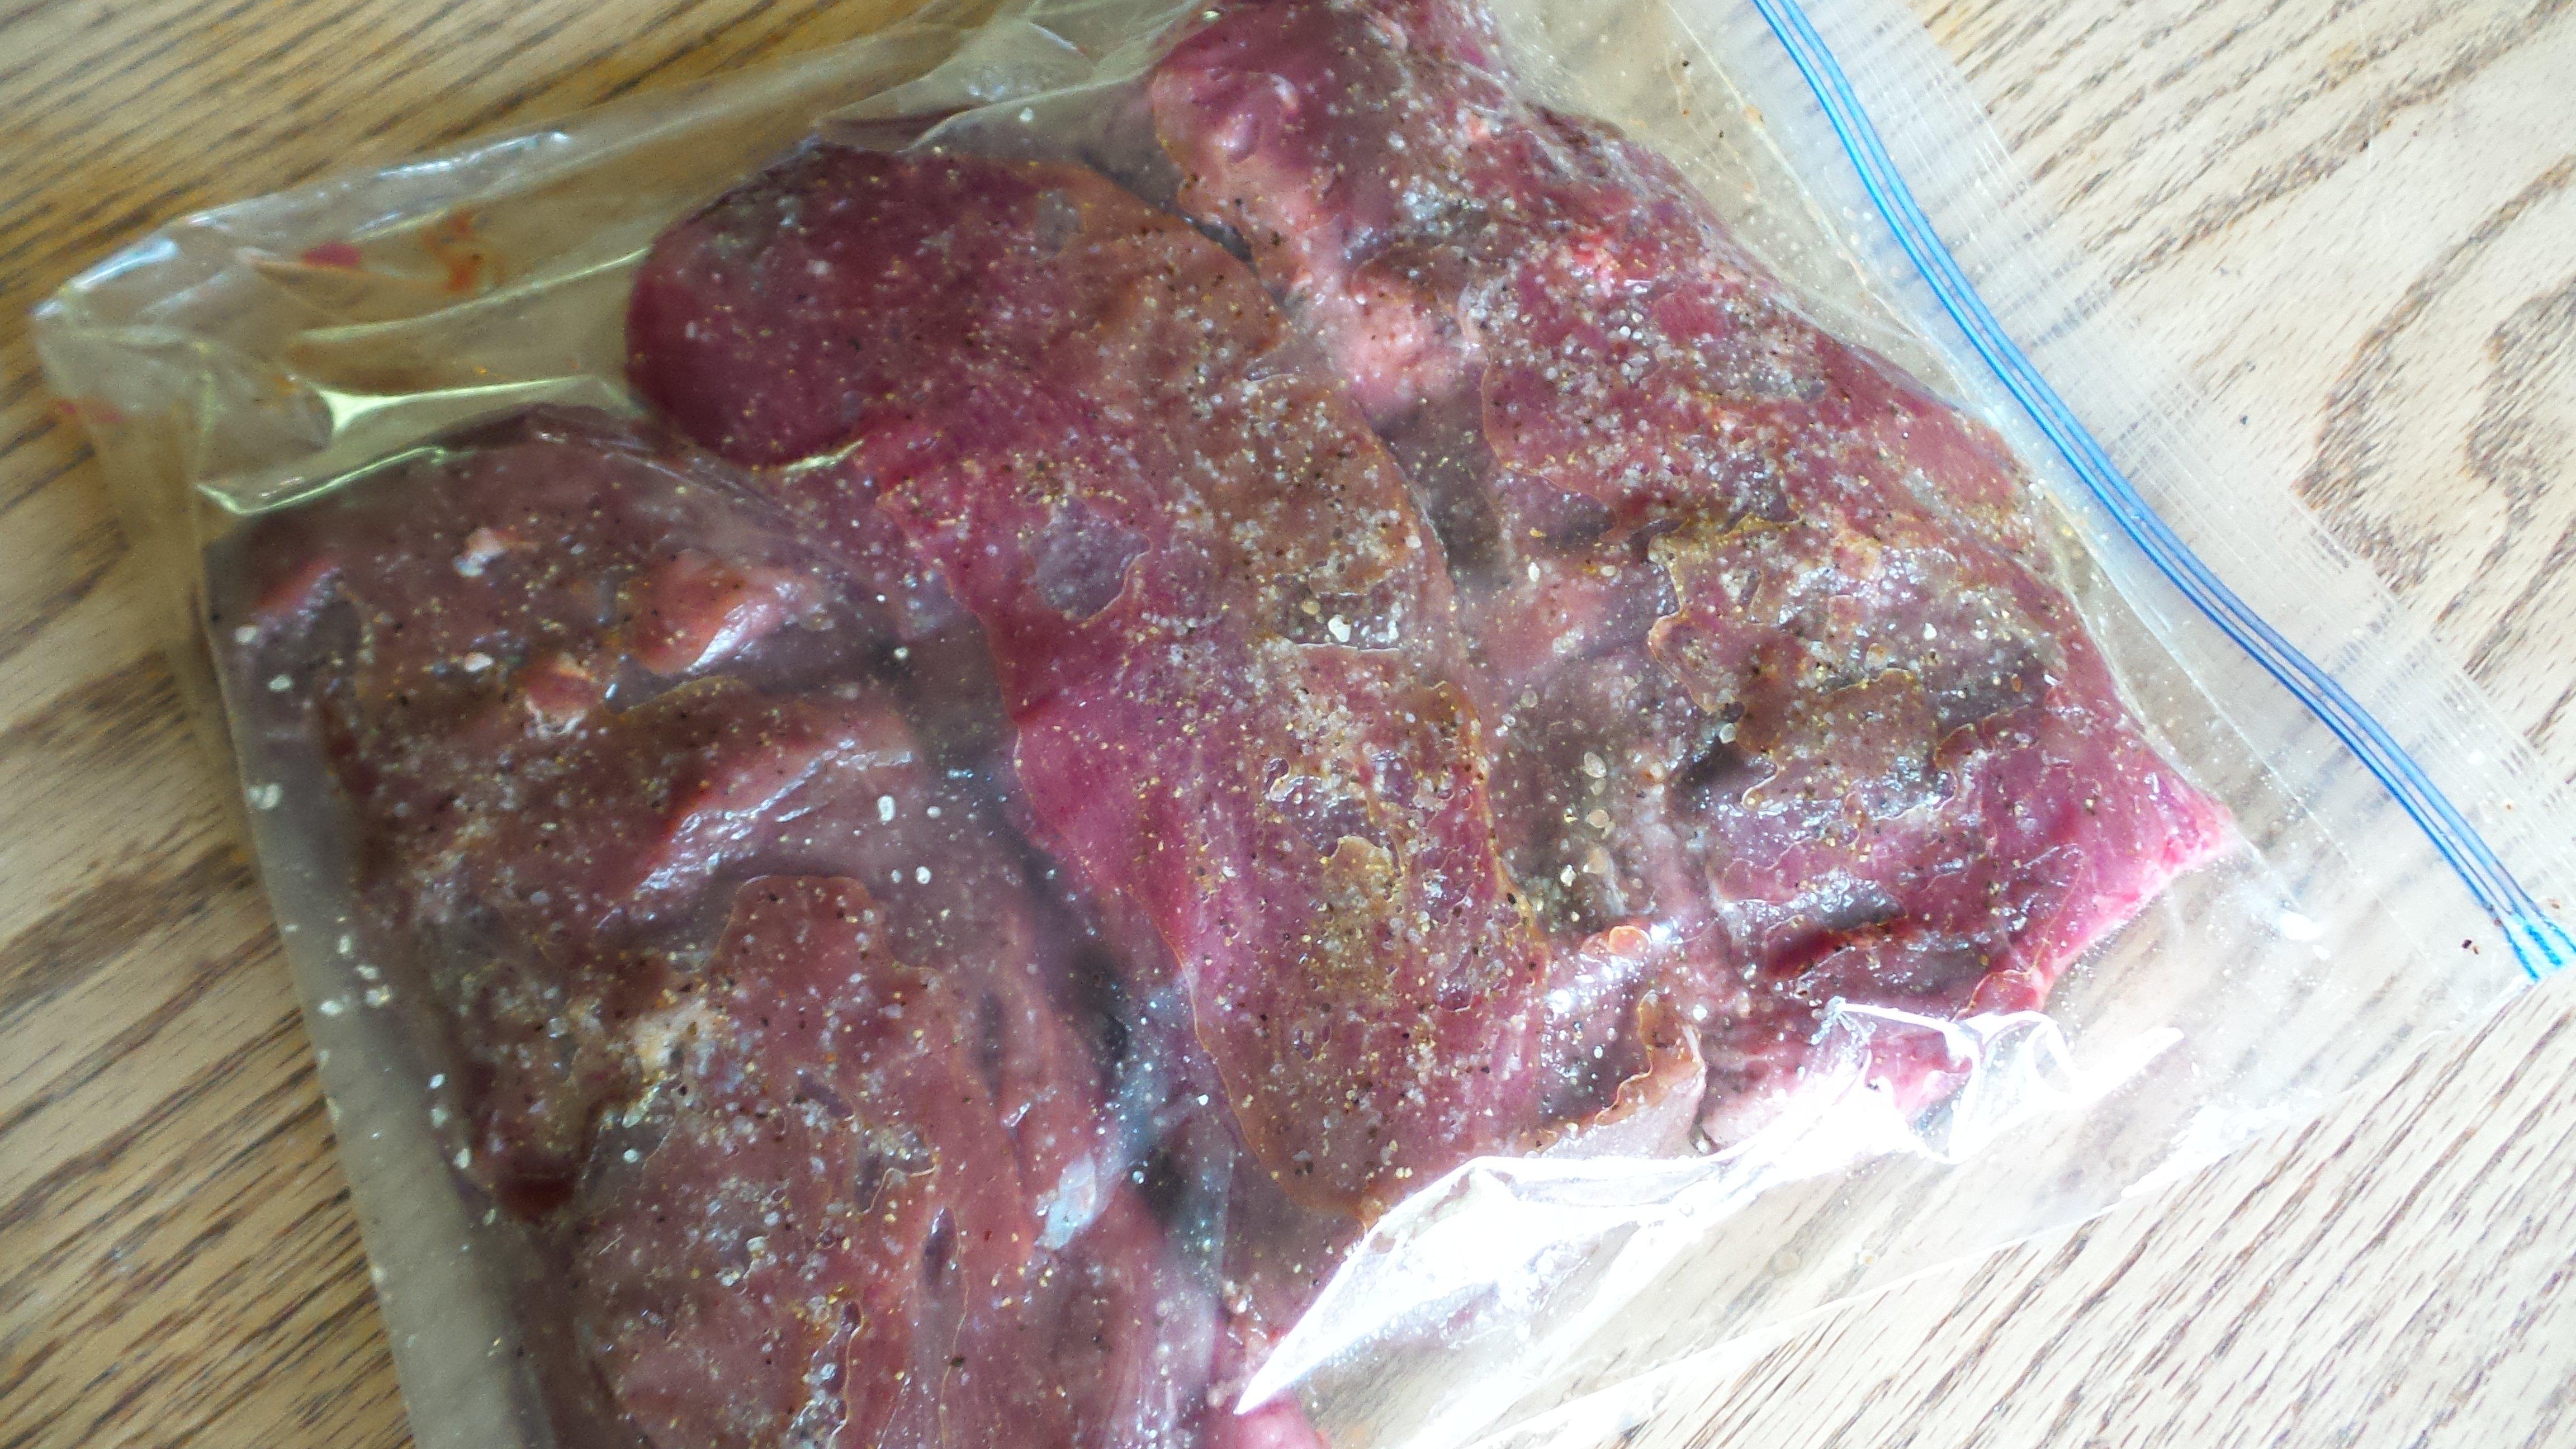 Season the backstrap and marinade at least four hours in the refrigerator.